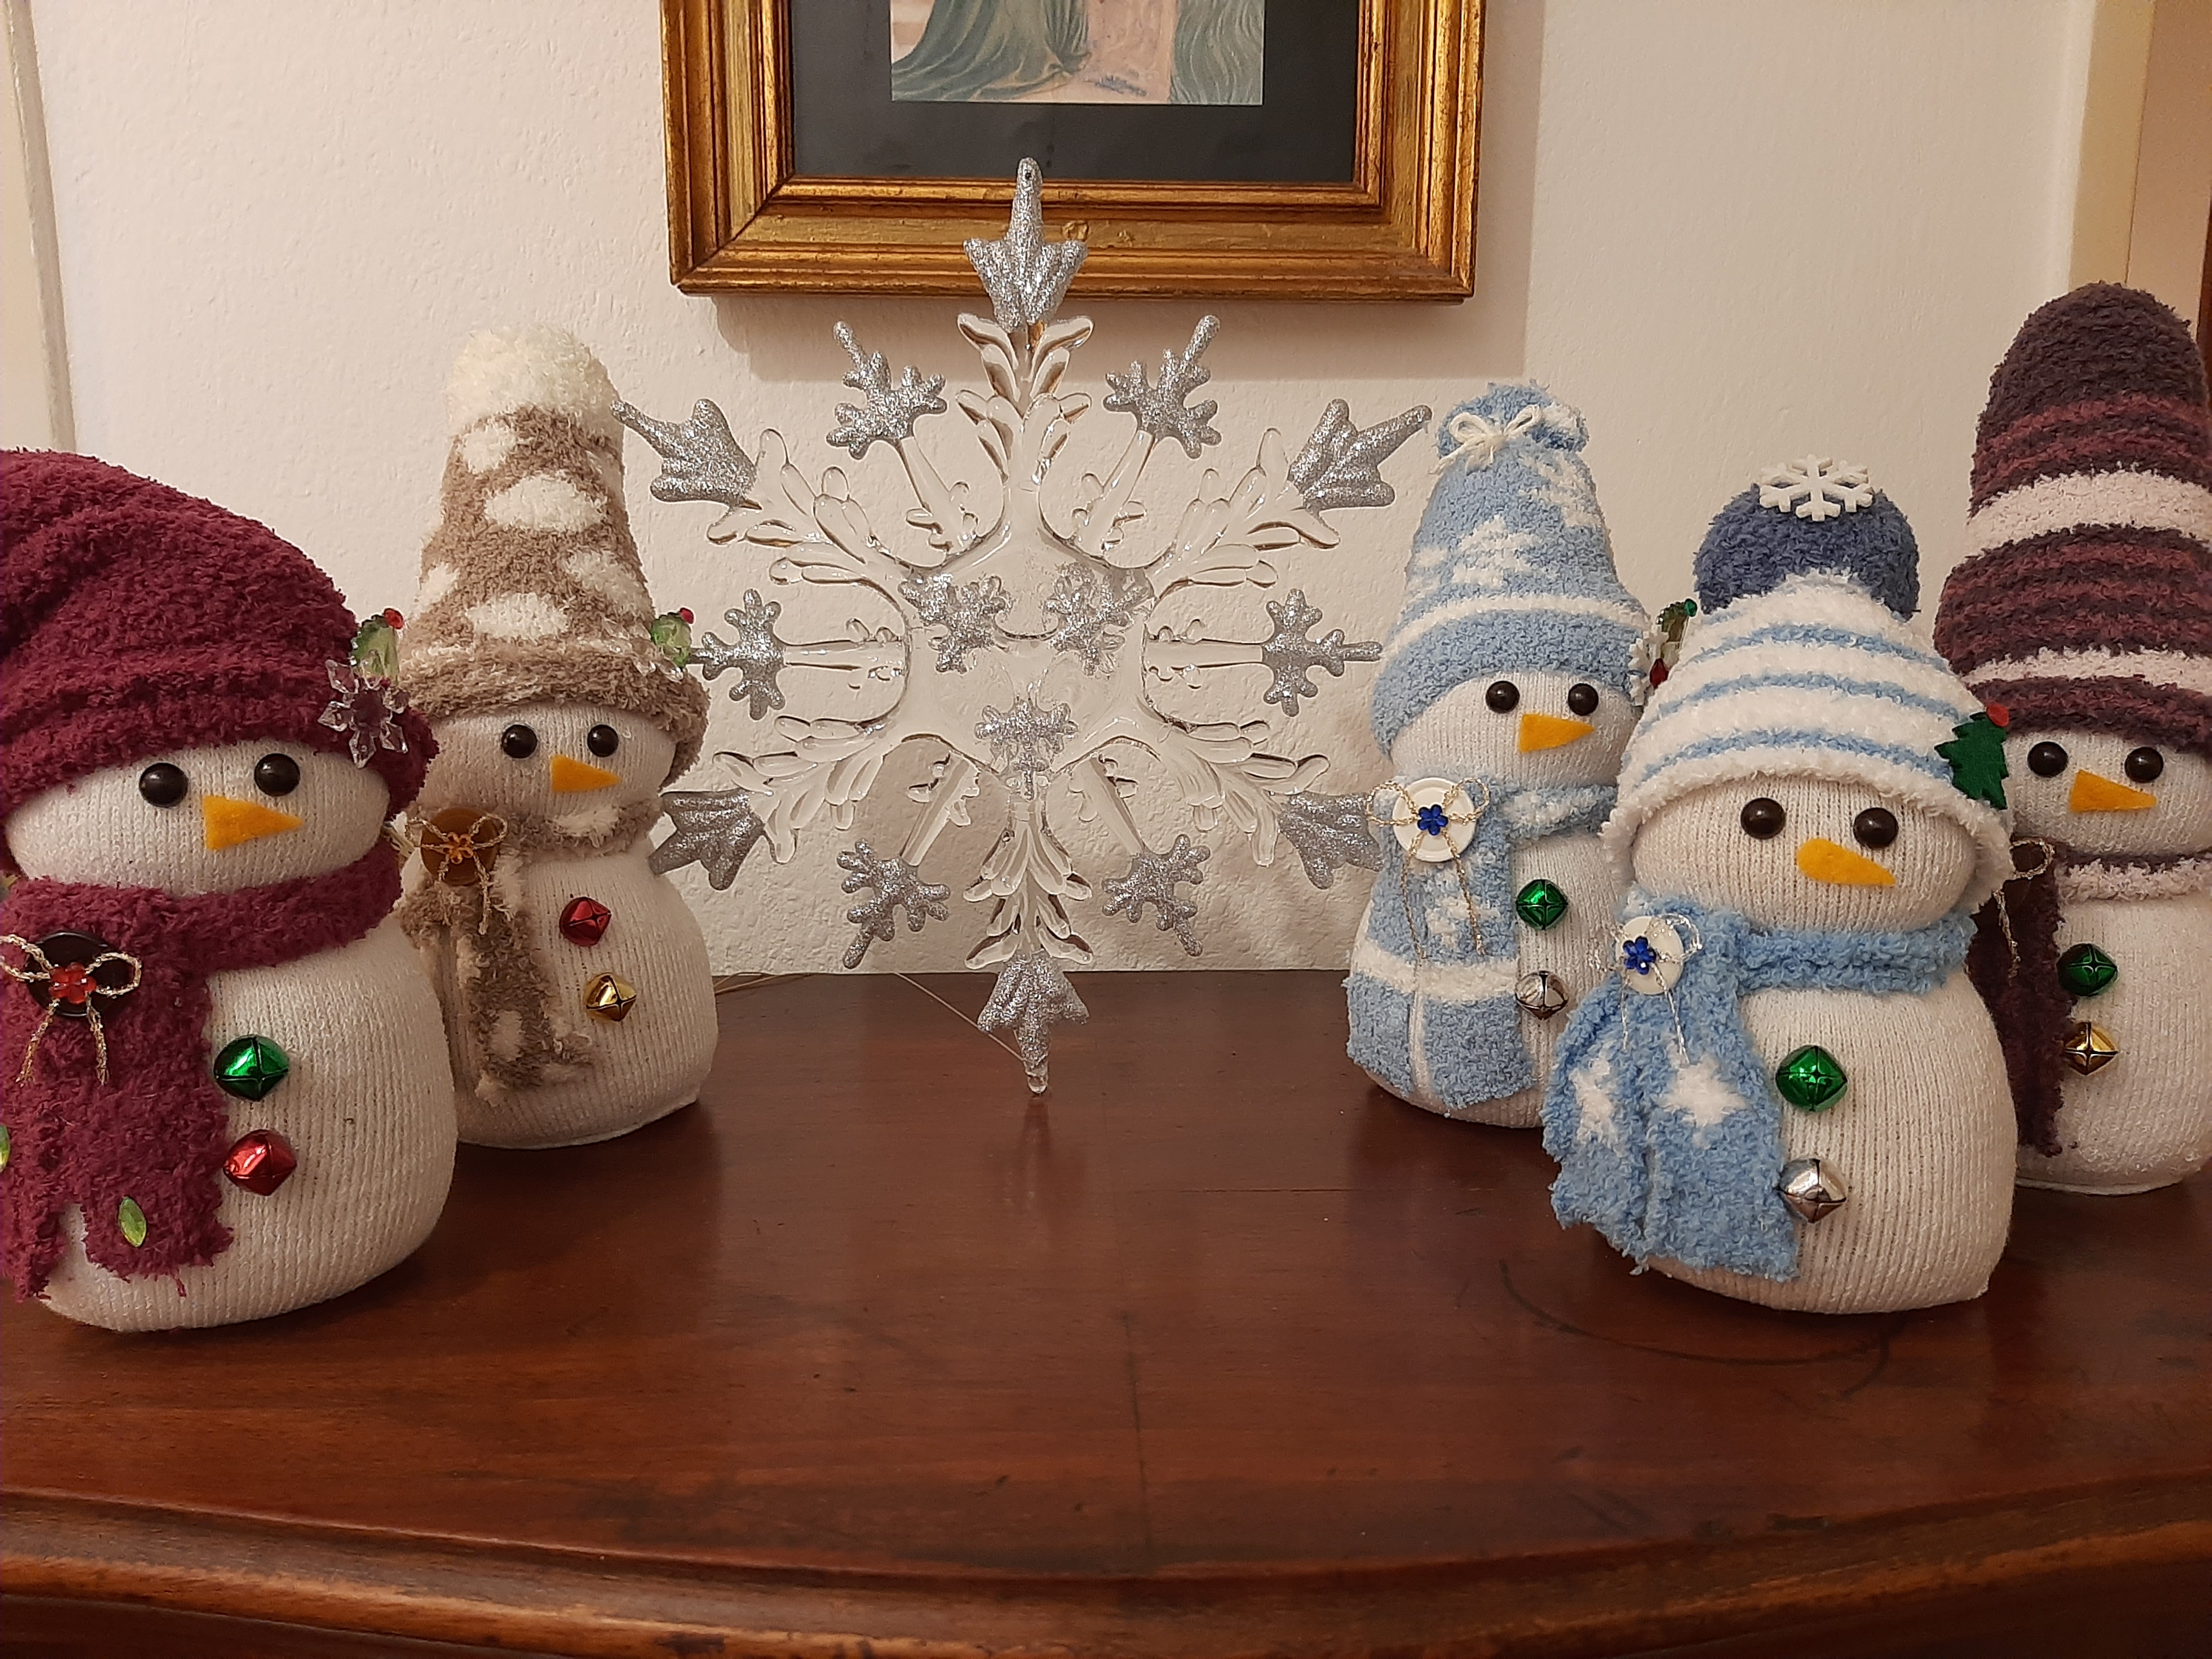 Christmas is over, but winter is still here - Turning X-mas decoration into Winter decoration.